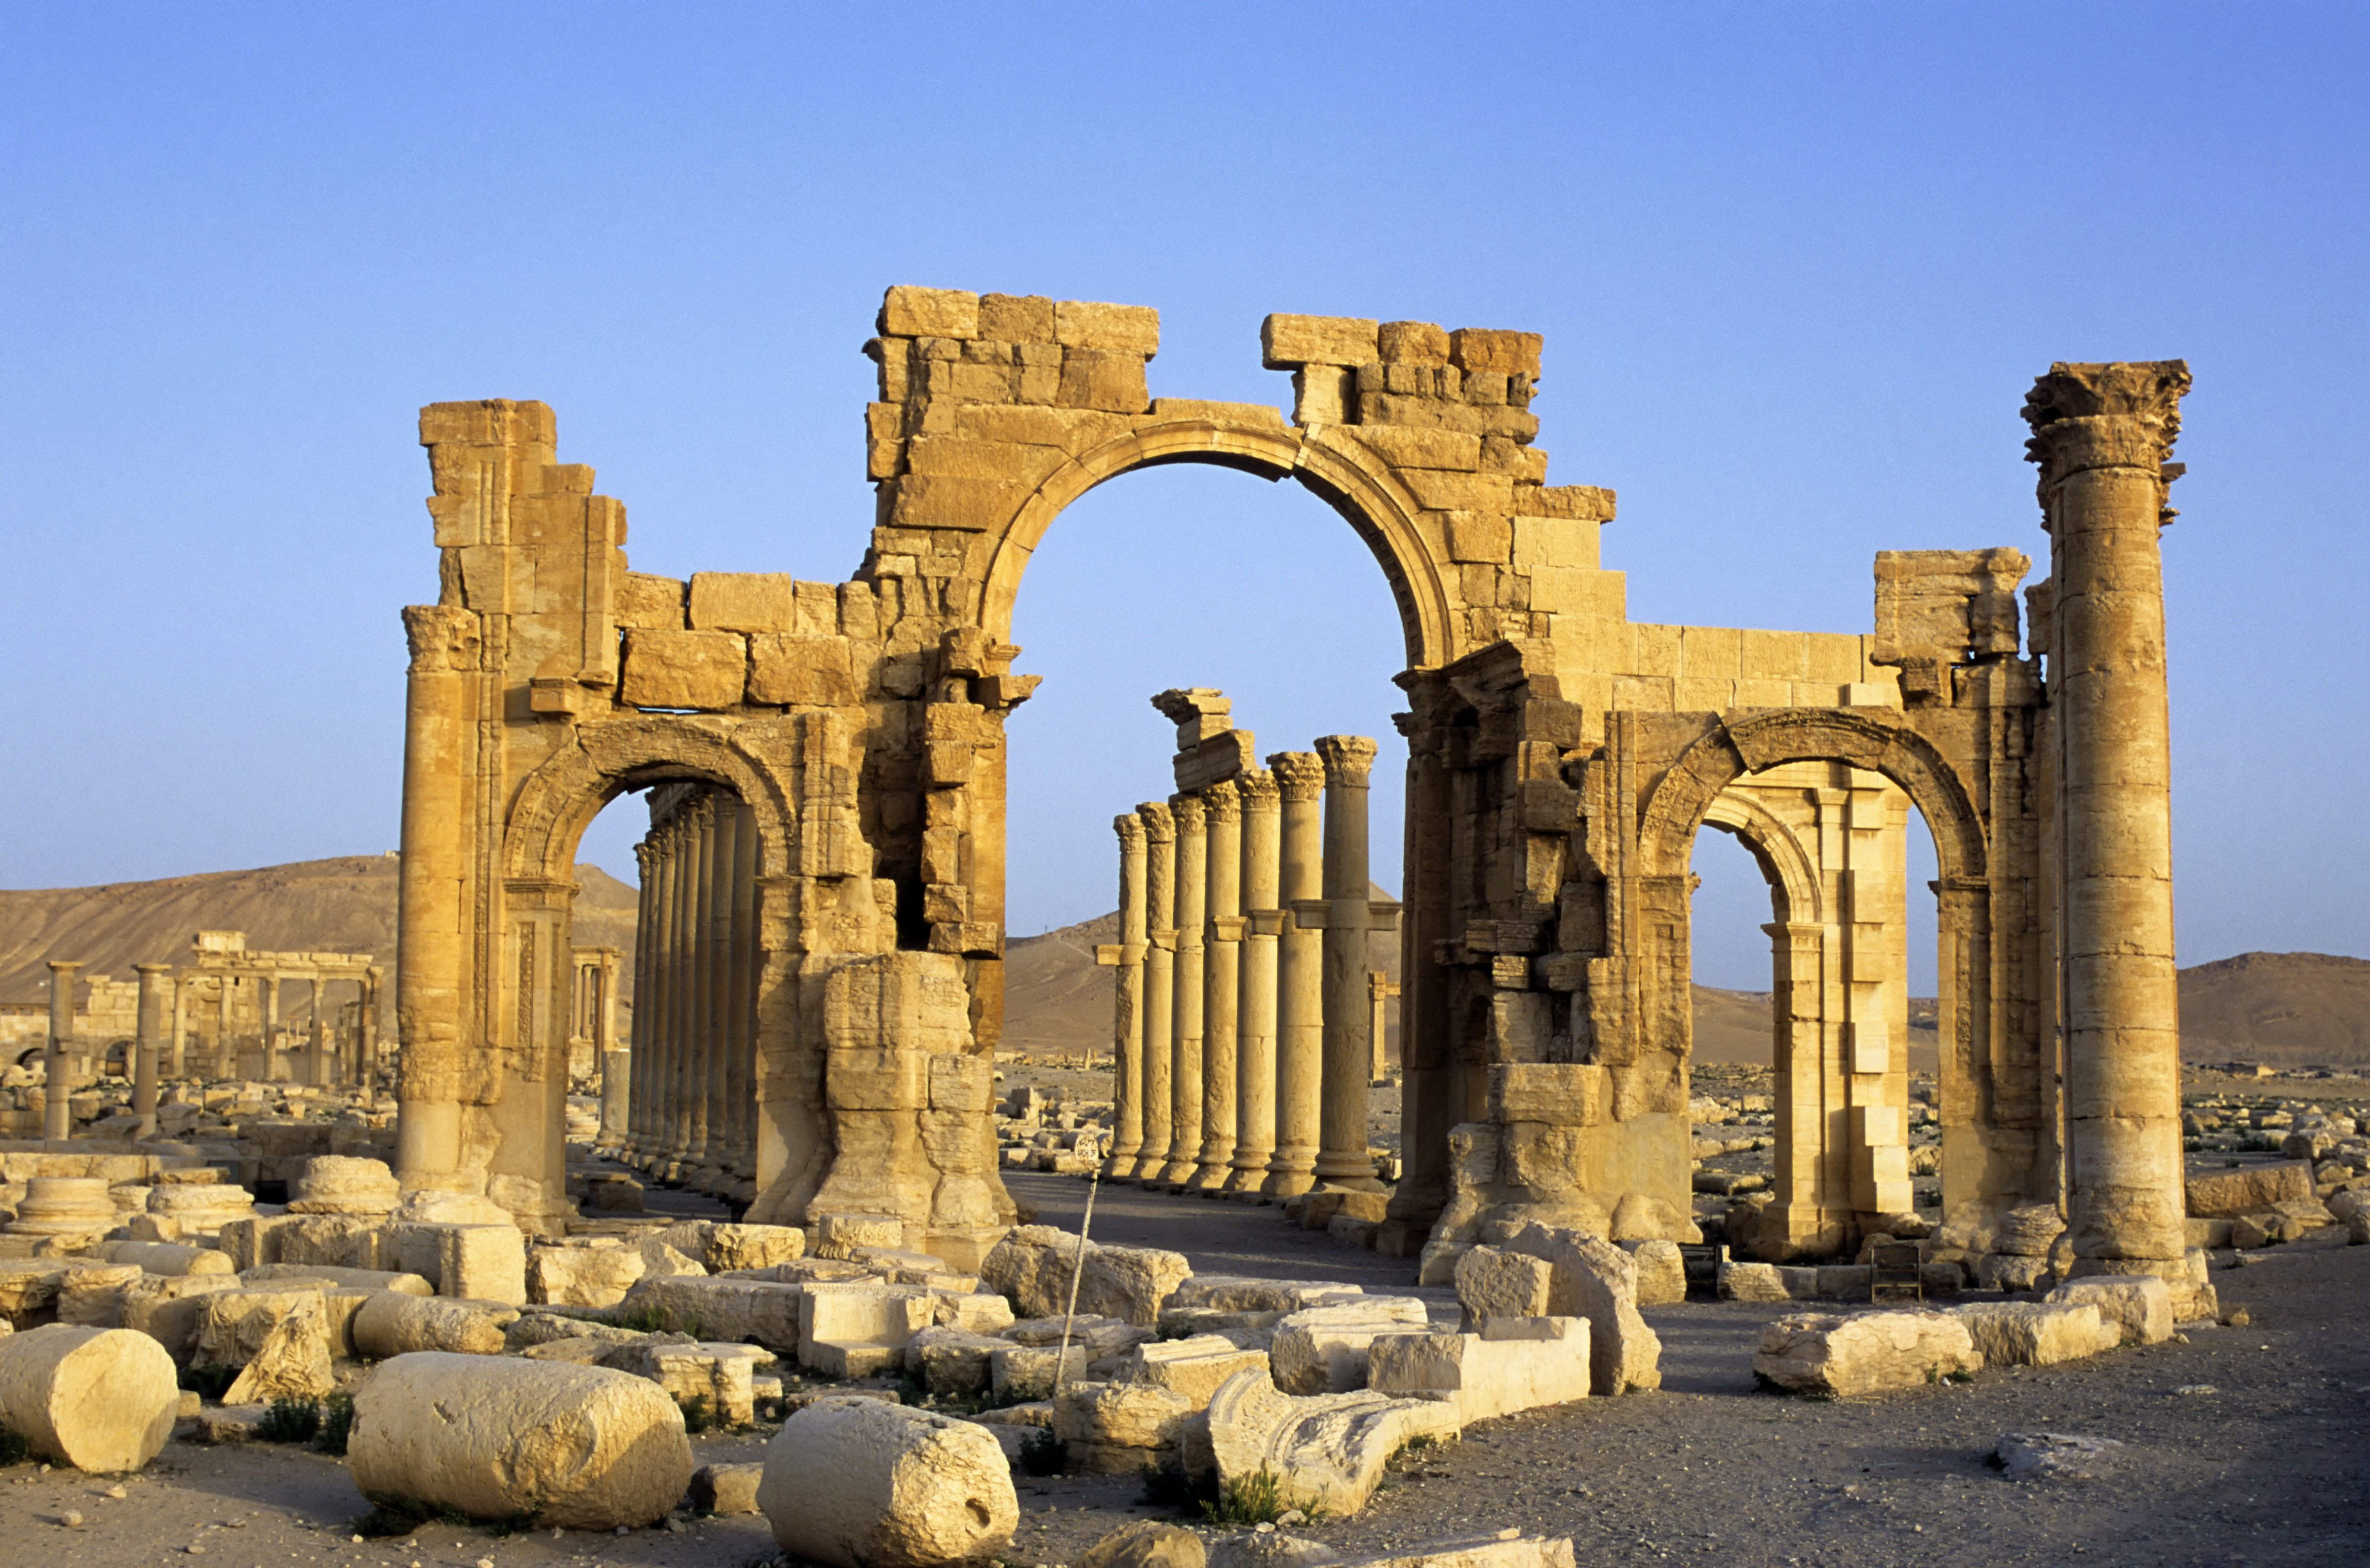 Syria, Palmyra, Ancient Roman City, Triumphal Arch And Colonnaded Street on Jan. 1, 2001. (Wolfgang Kaehler—LightRocket/Getty Images)